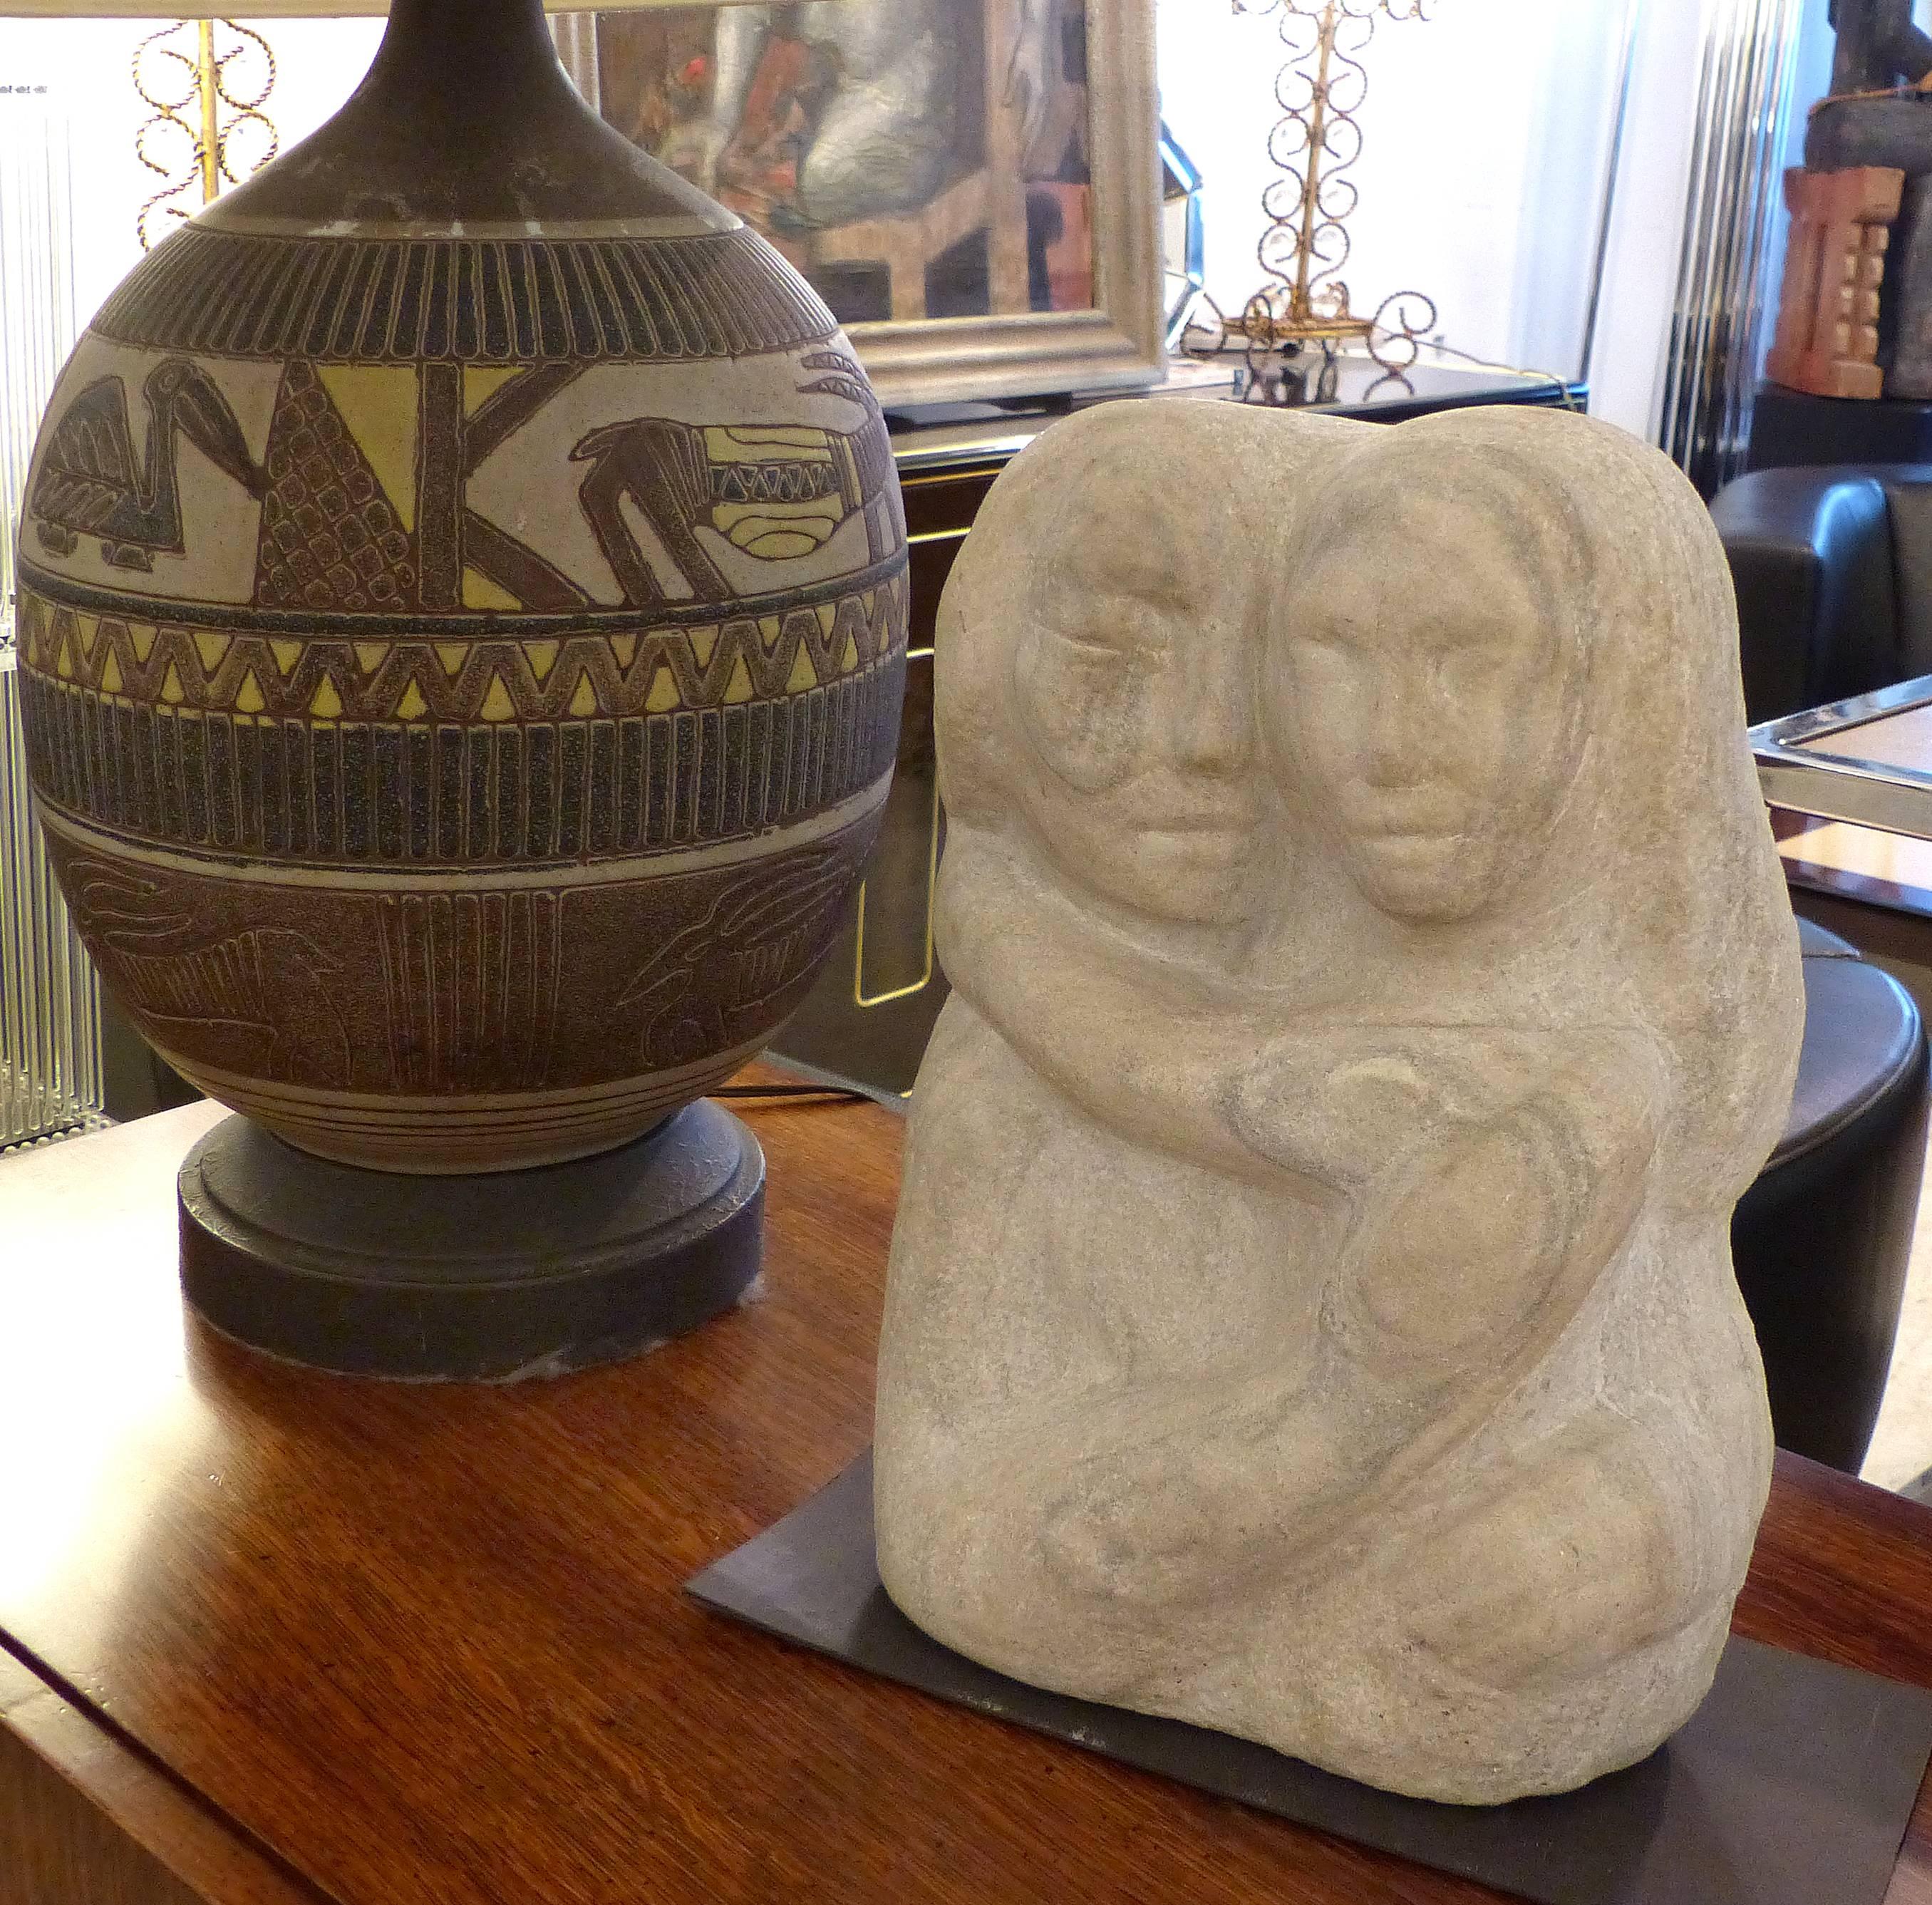 Offered for sale is a Mid-Century Modern carved limestone sculpture by Florence Krieger (1919-2011). Florence Krieger was a listed Brooklyn artist who exhibited work in several artistic mediums. The sculpture is carved in limestone and viewed from